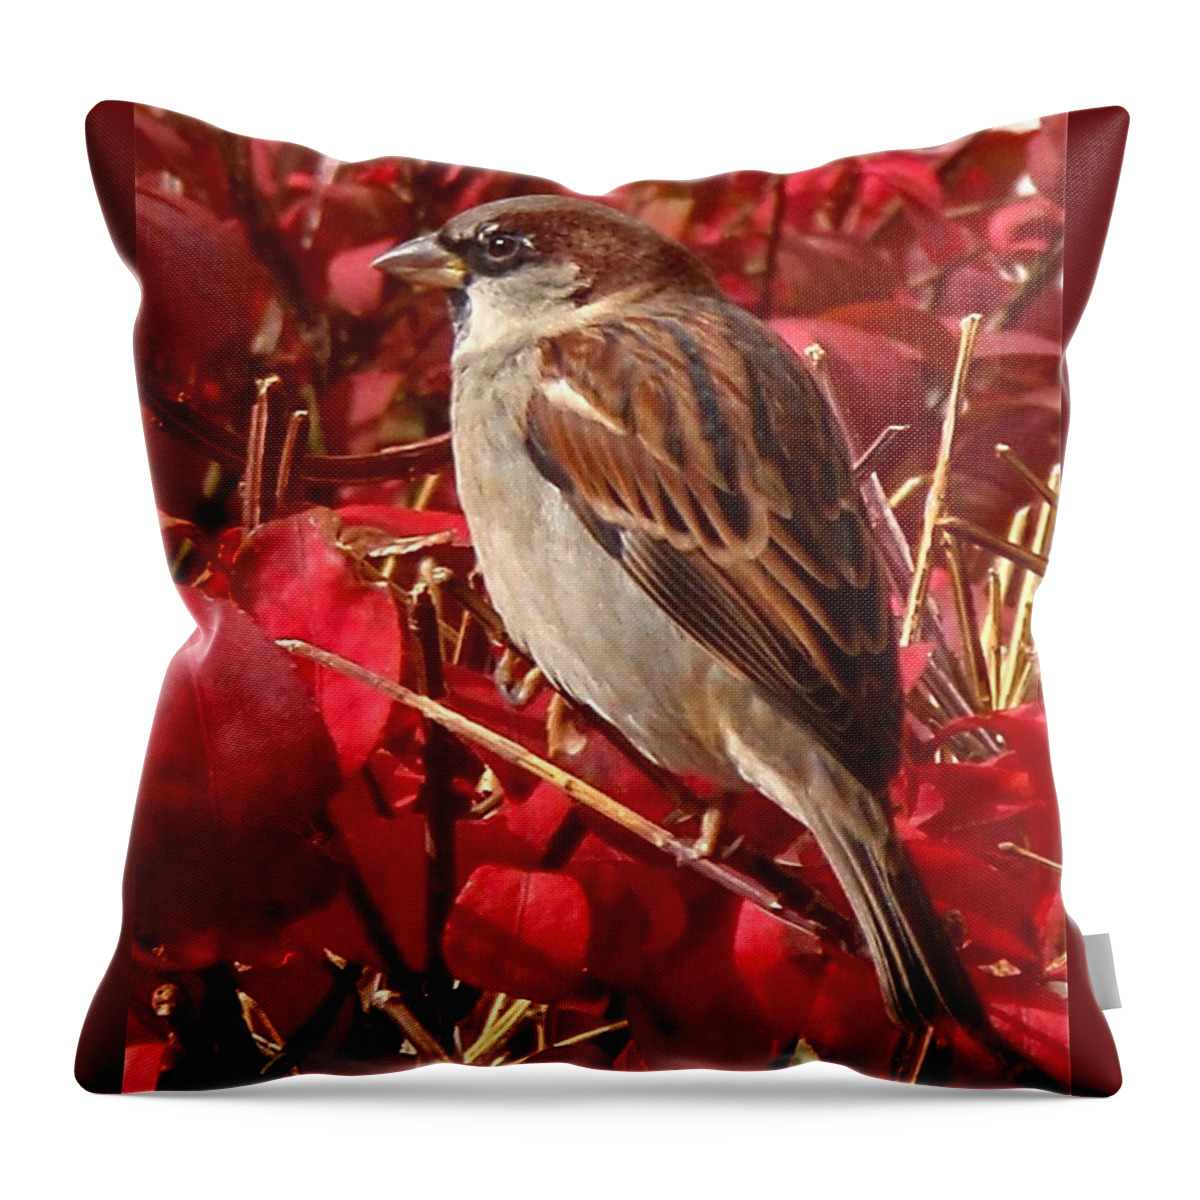 Sparrow Throw Pillow featuring the photograph Sparrow by Rona Black